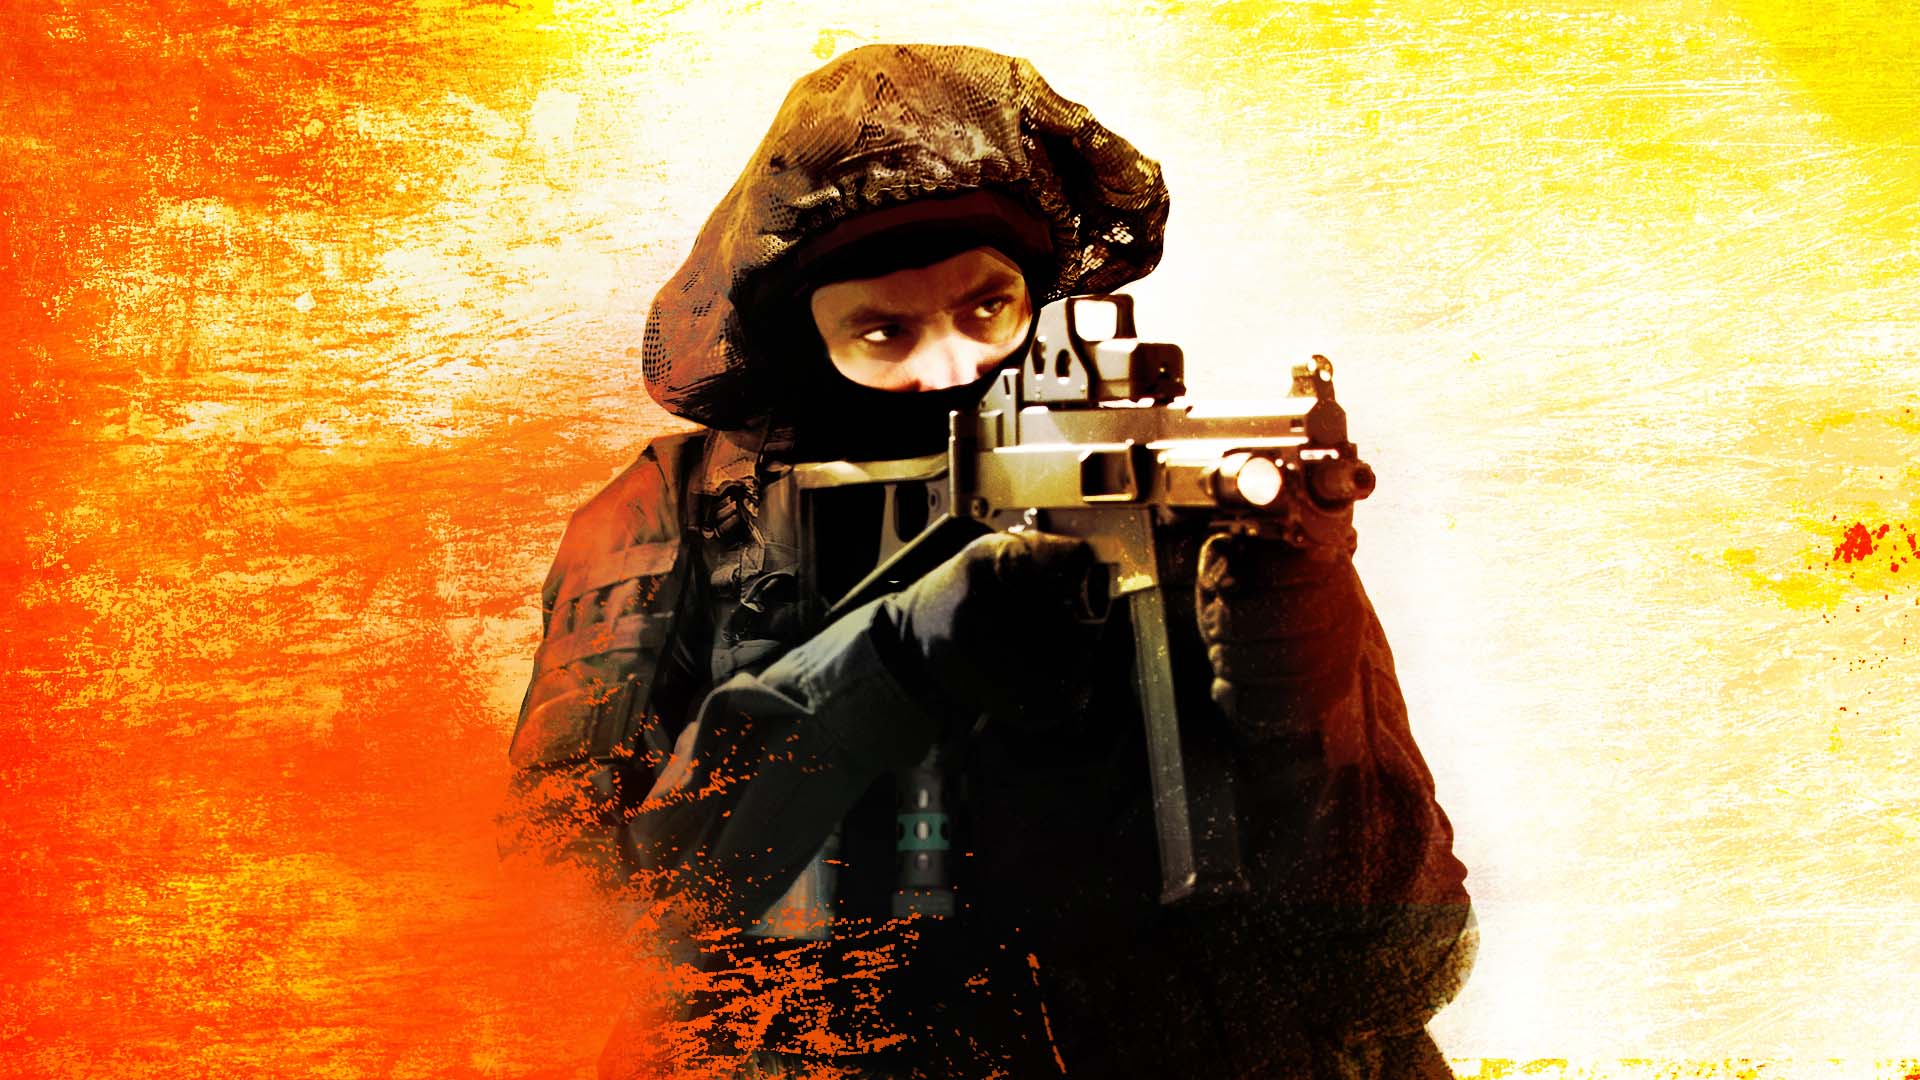 Wallpaper Counter Strike Soldiers cs go Games 1366x768